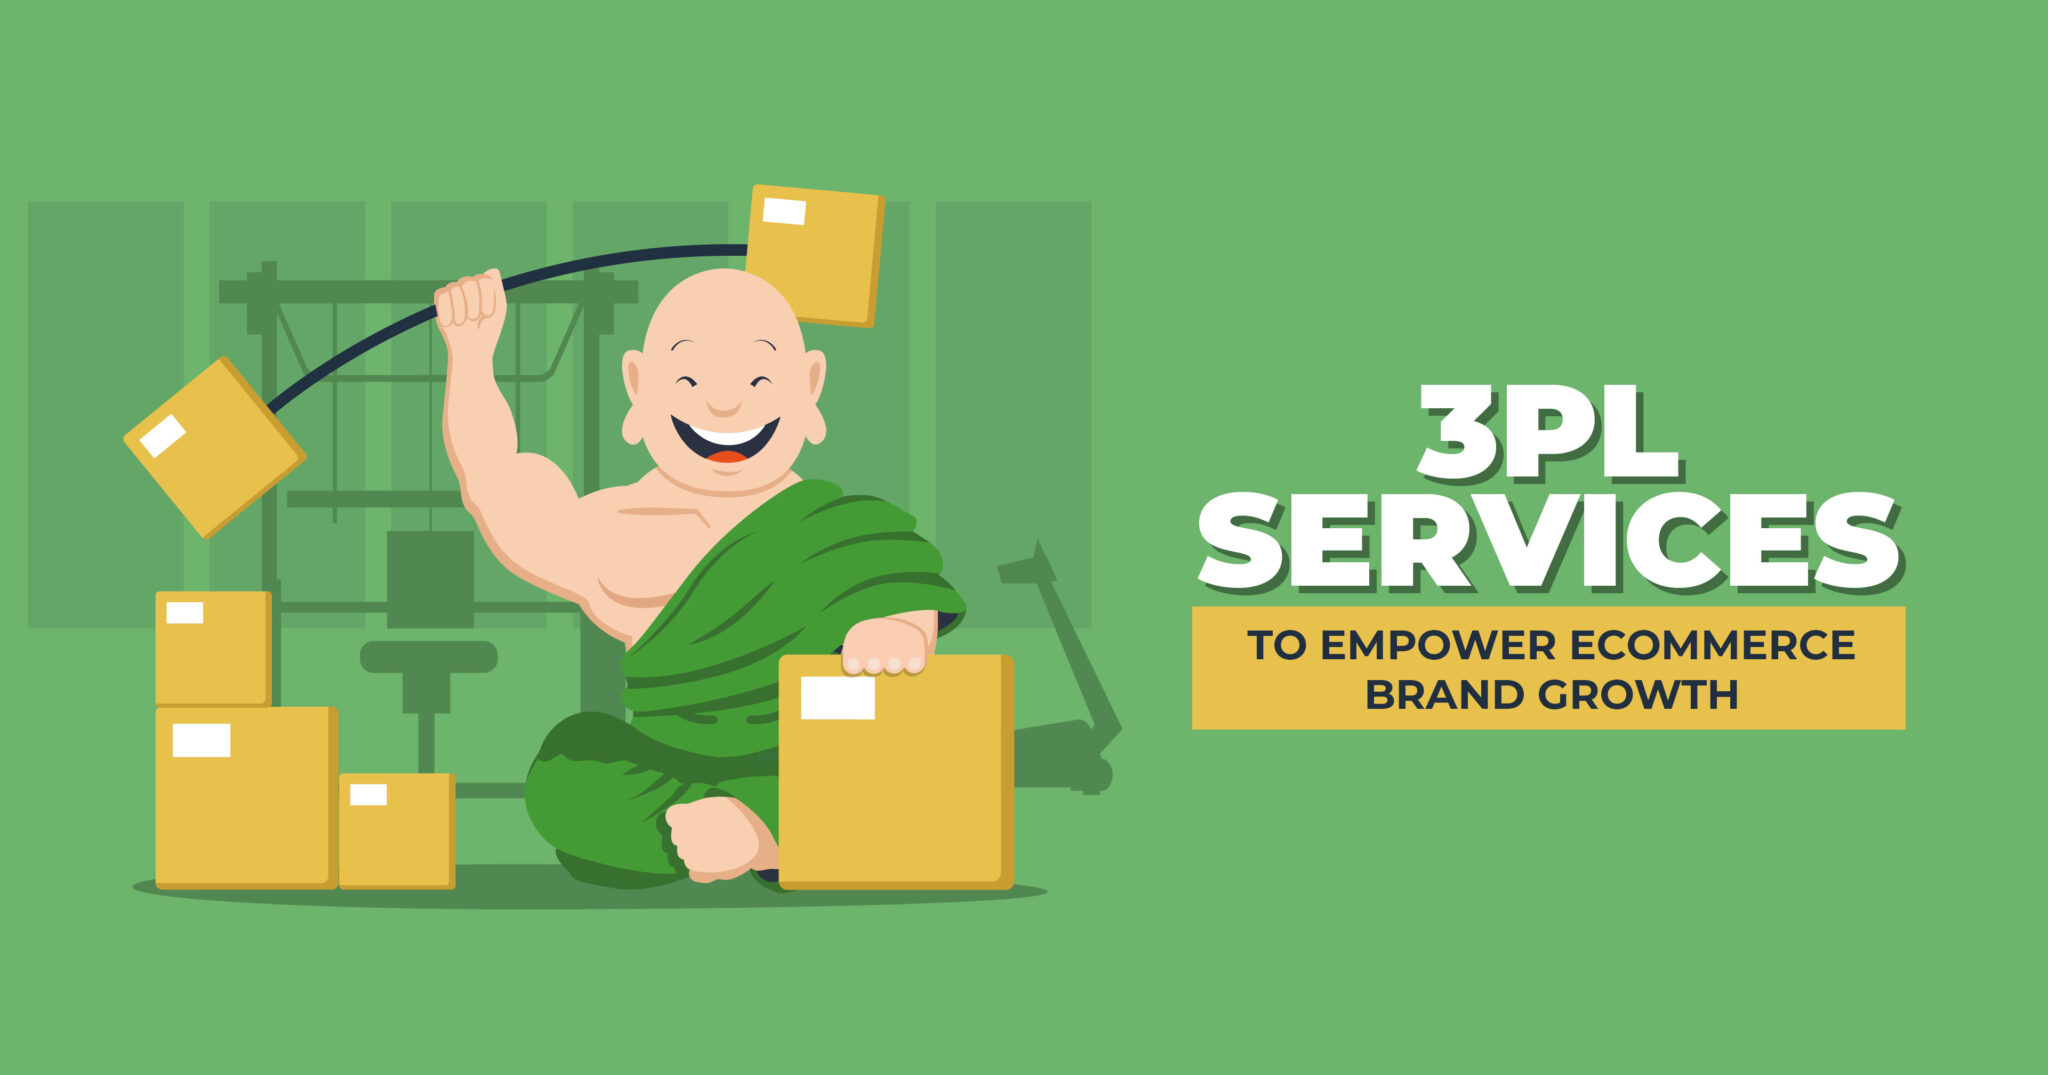 3PL Services to Empower Ecommerce Brand Growth